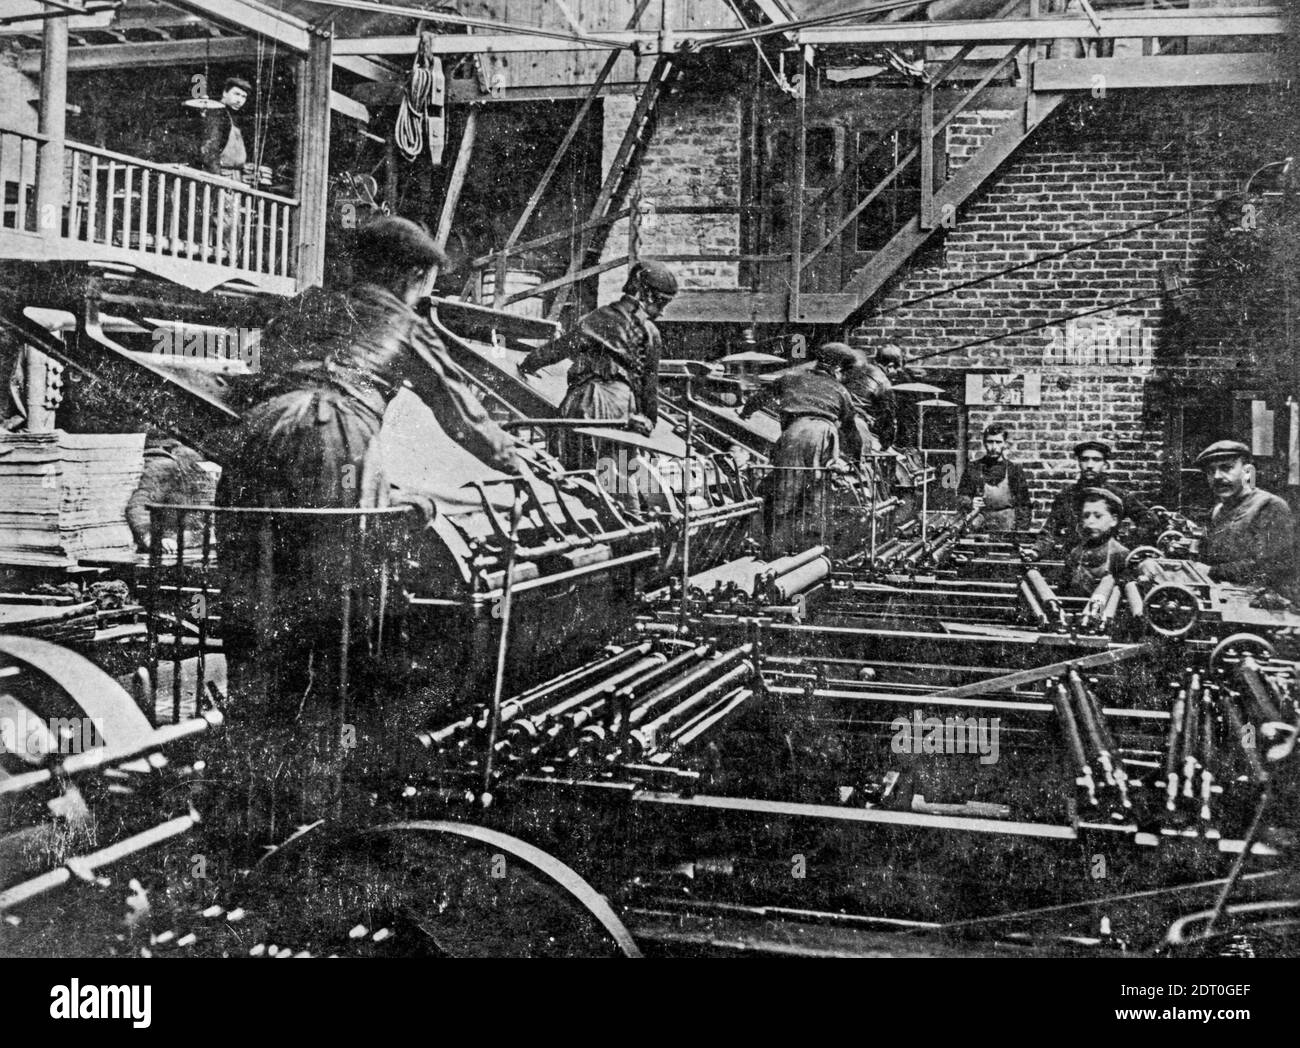 Early 1900s black and white archival photo showing pressmen and children working on lithographic printing presses in pressroom / print shop Stock Photo